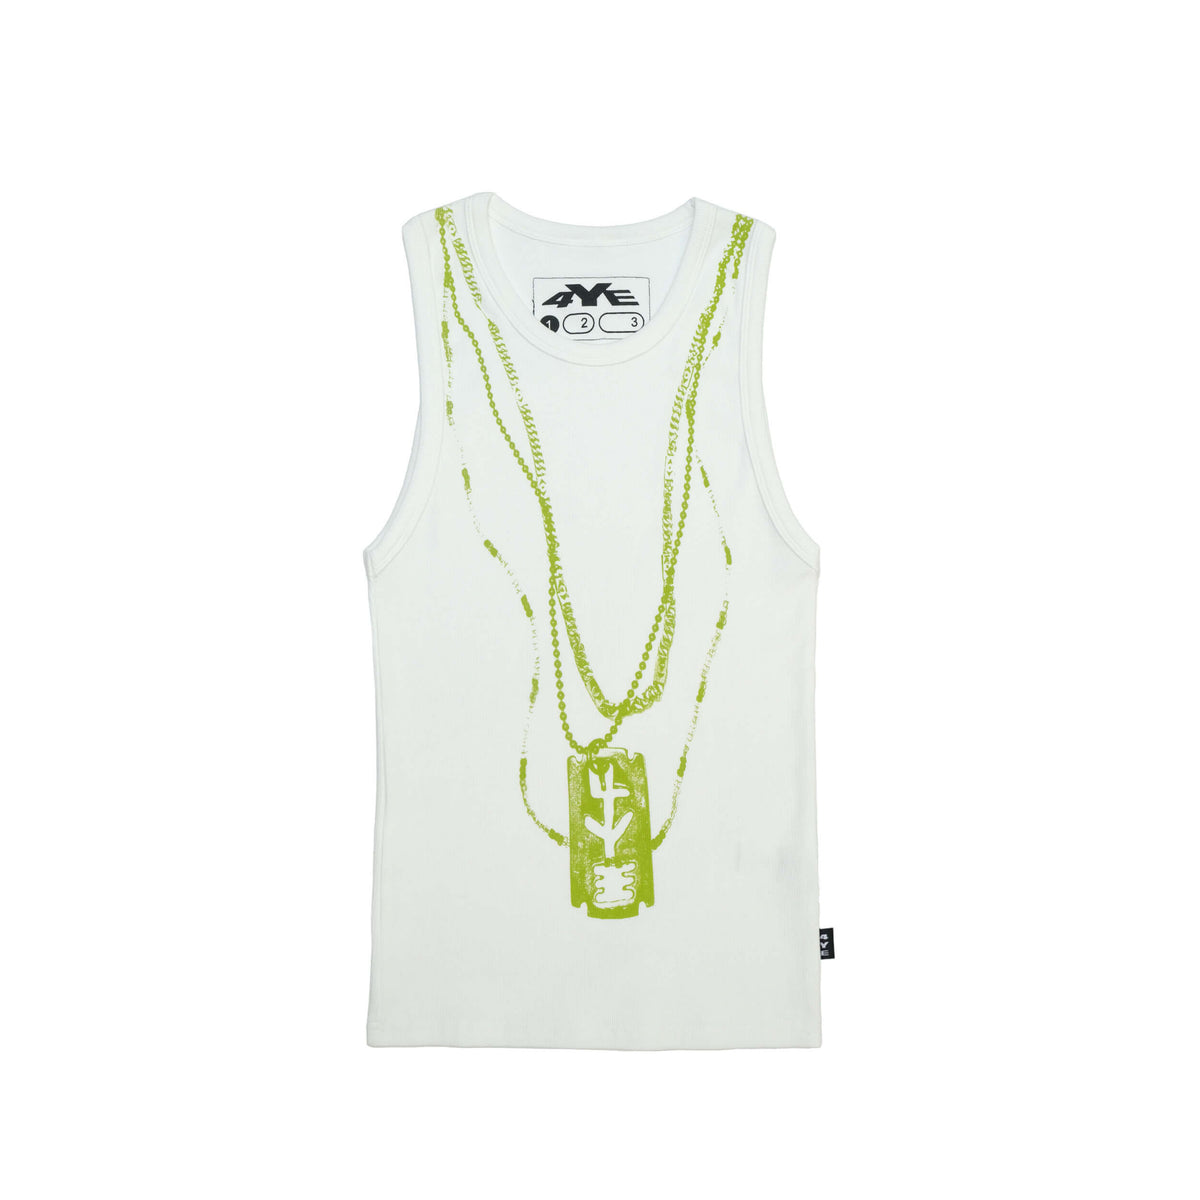 Front view of the 4YE Trompe L'oiel tank in white showing screen printed chain motif in matcha